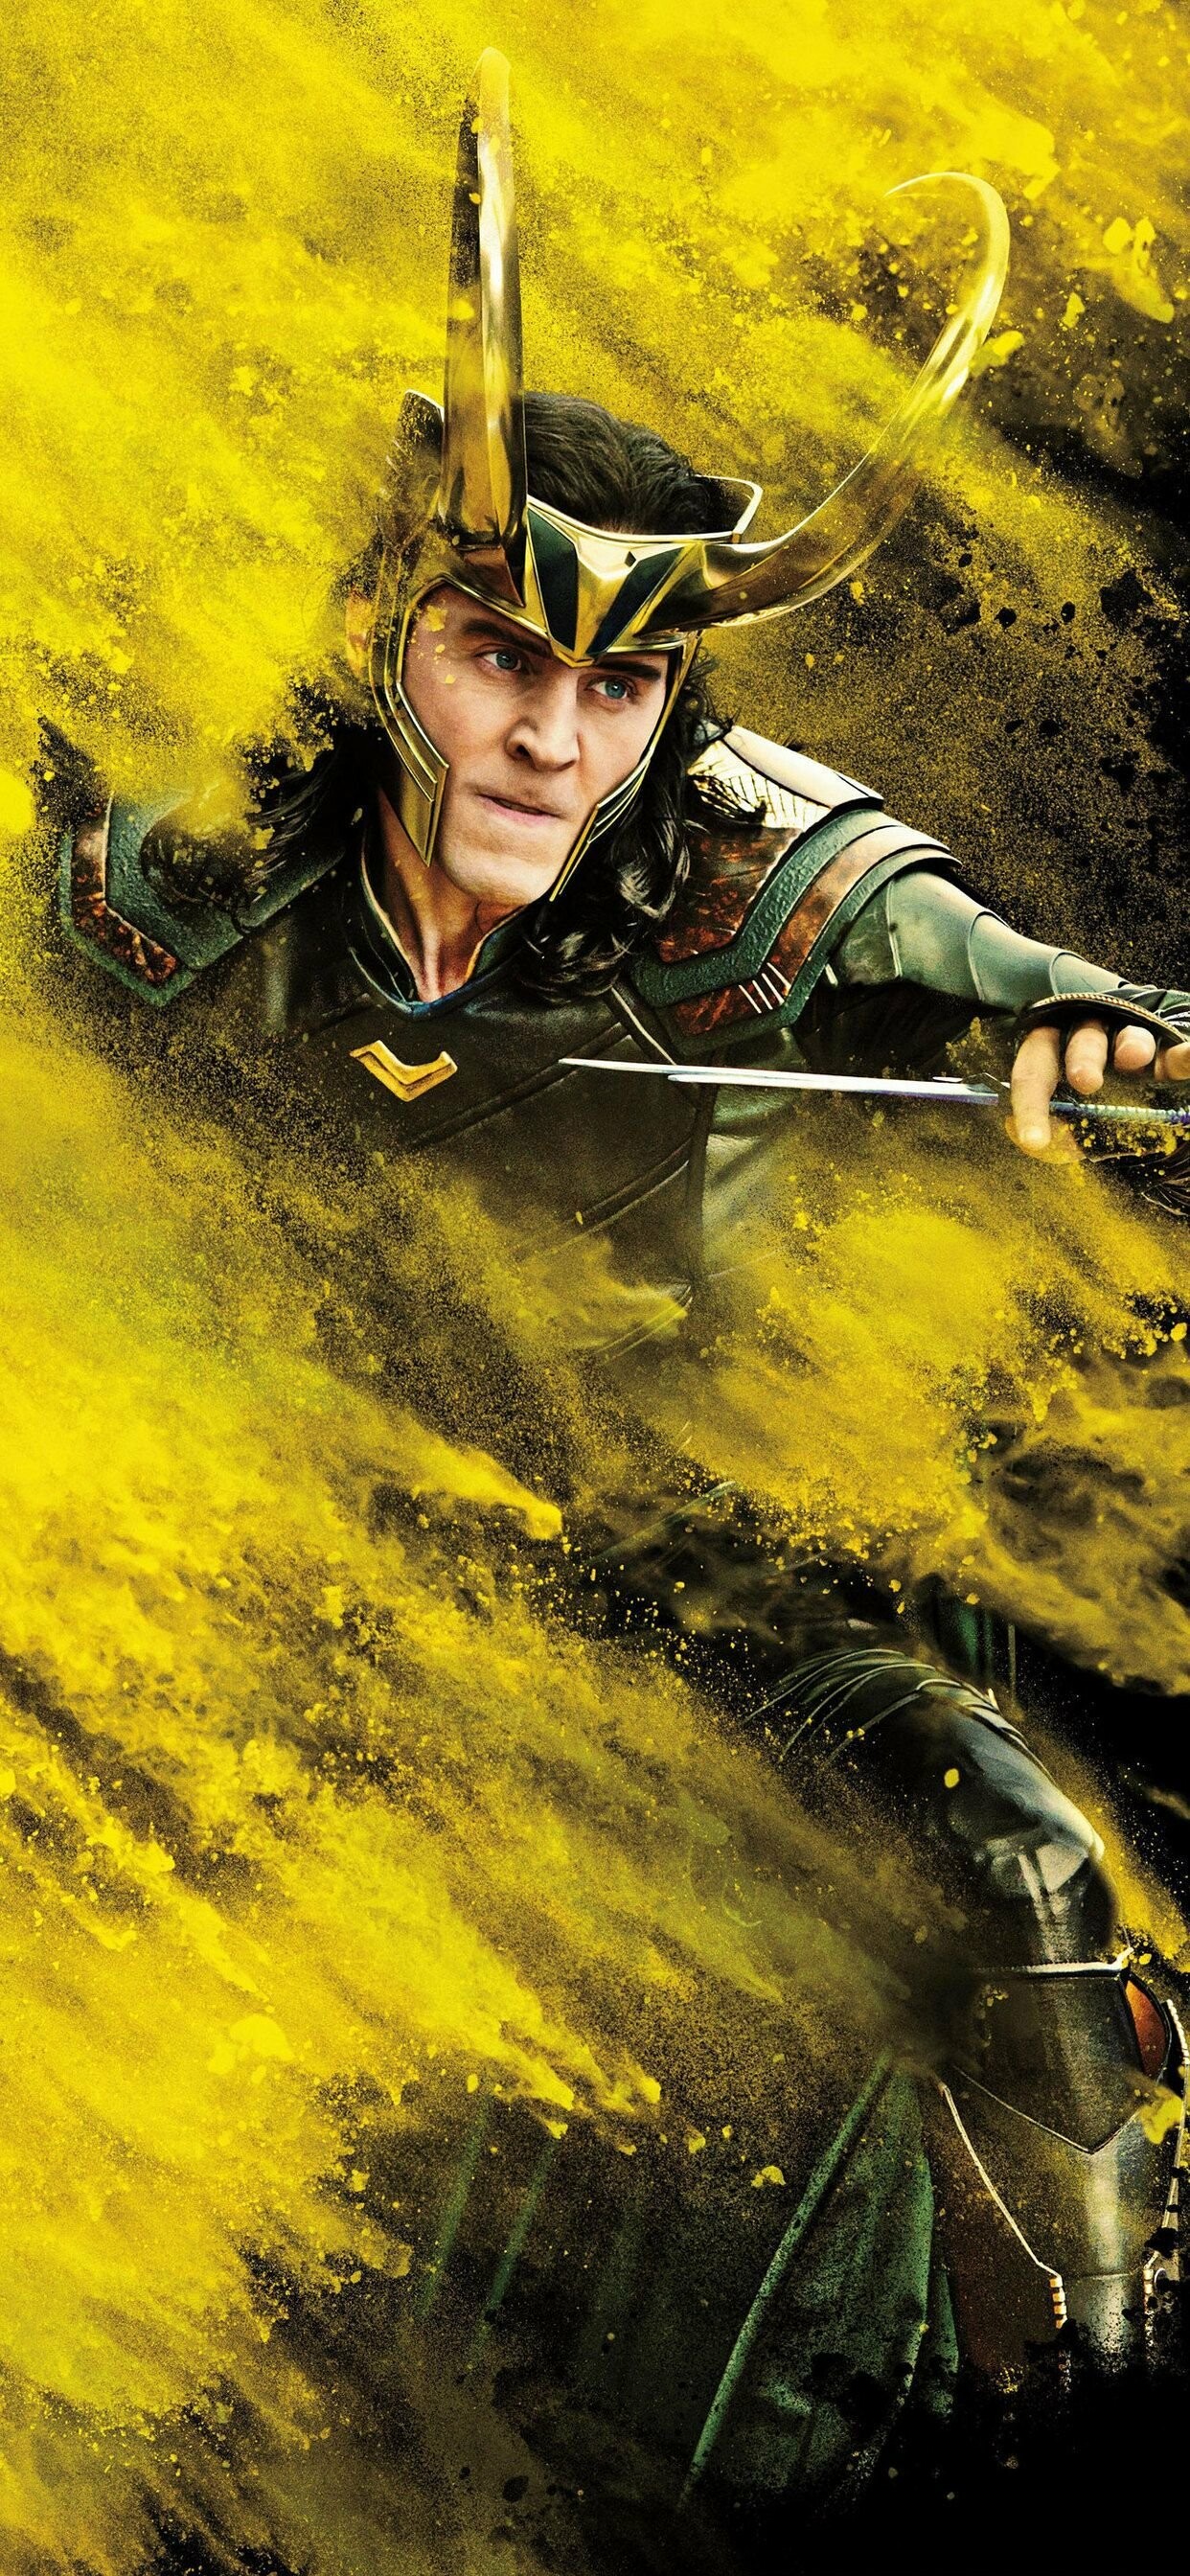 Loki (TV Series): God of Mischief, has been portrayed as both a supervillain and antihero. 1250x2690 HD Background.